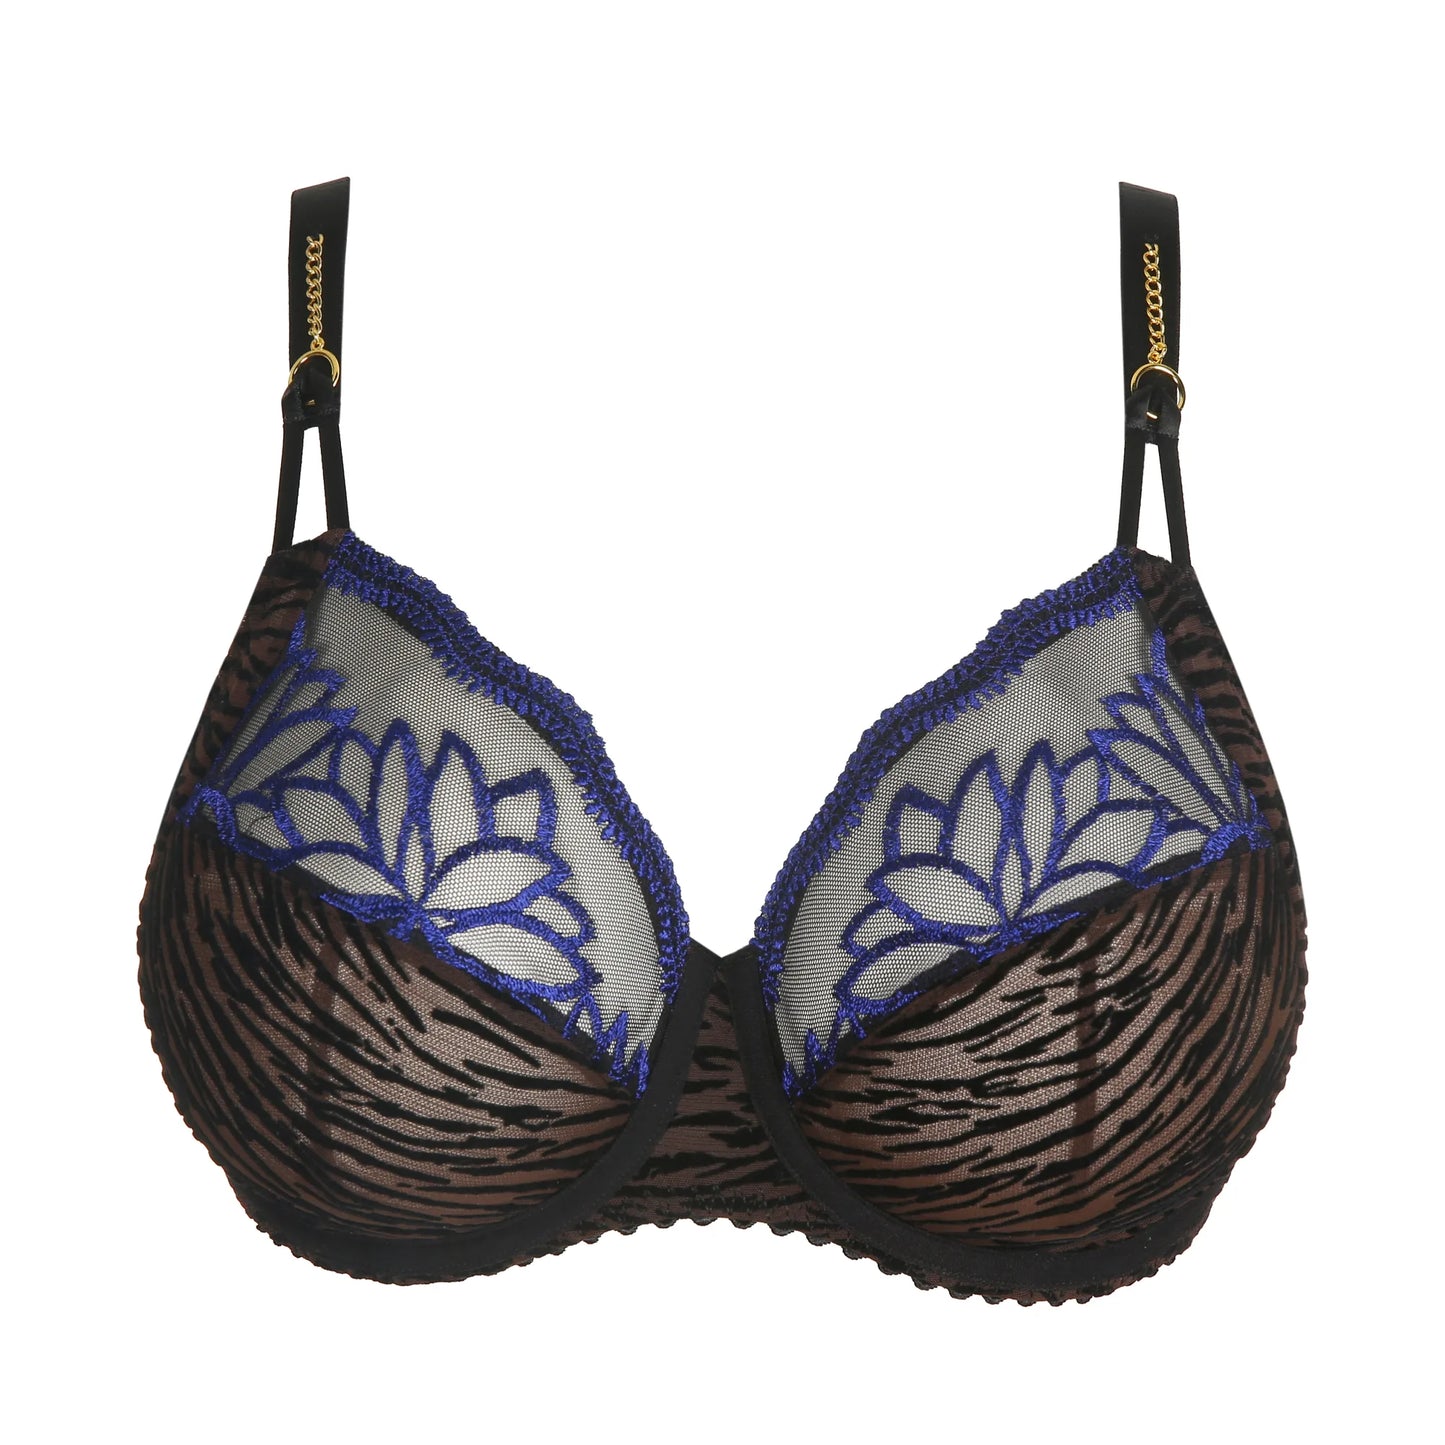 Prima Donna Beugel BH - Cheyney 0163450 - Sultry black